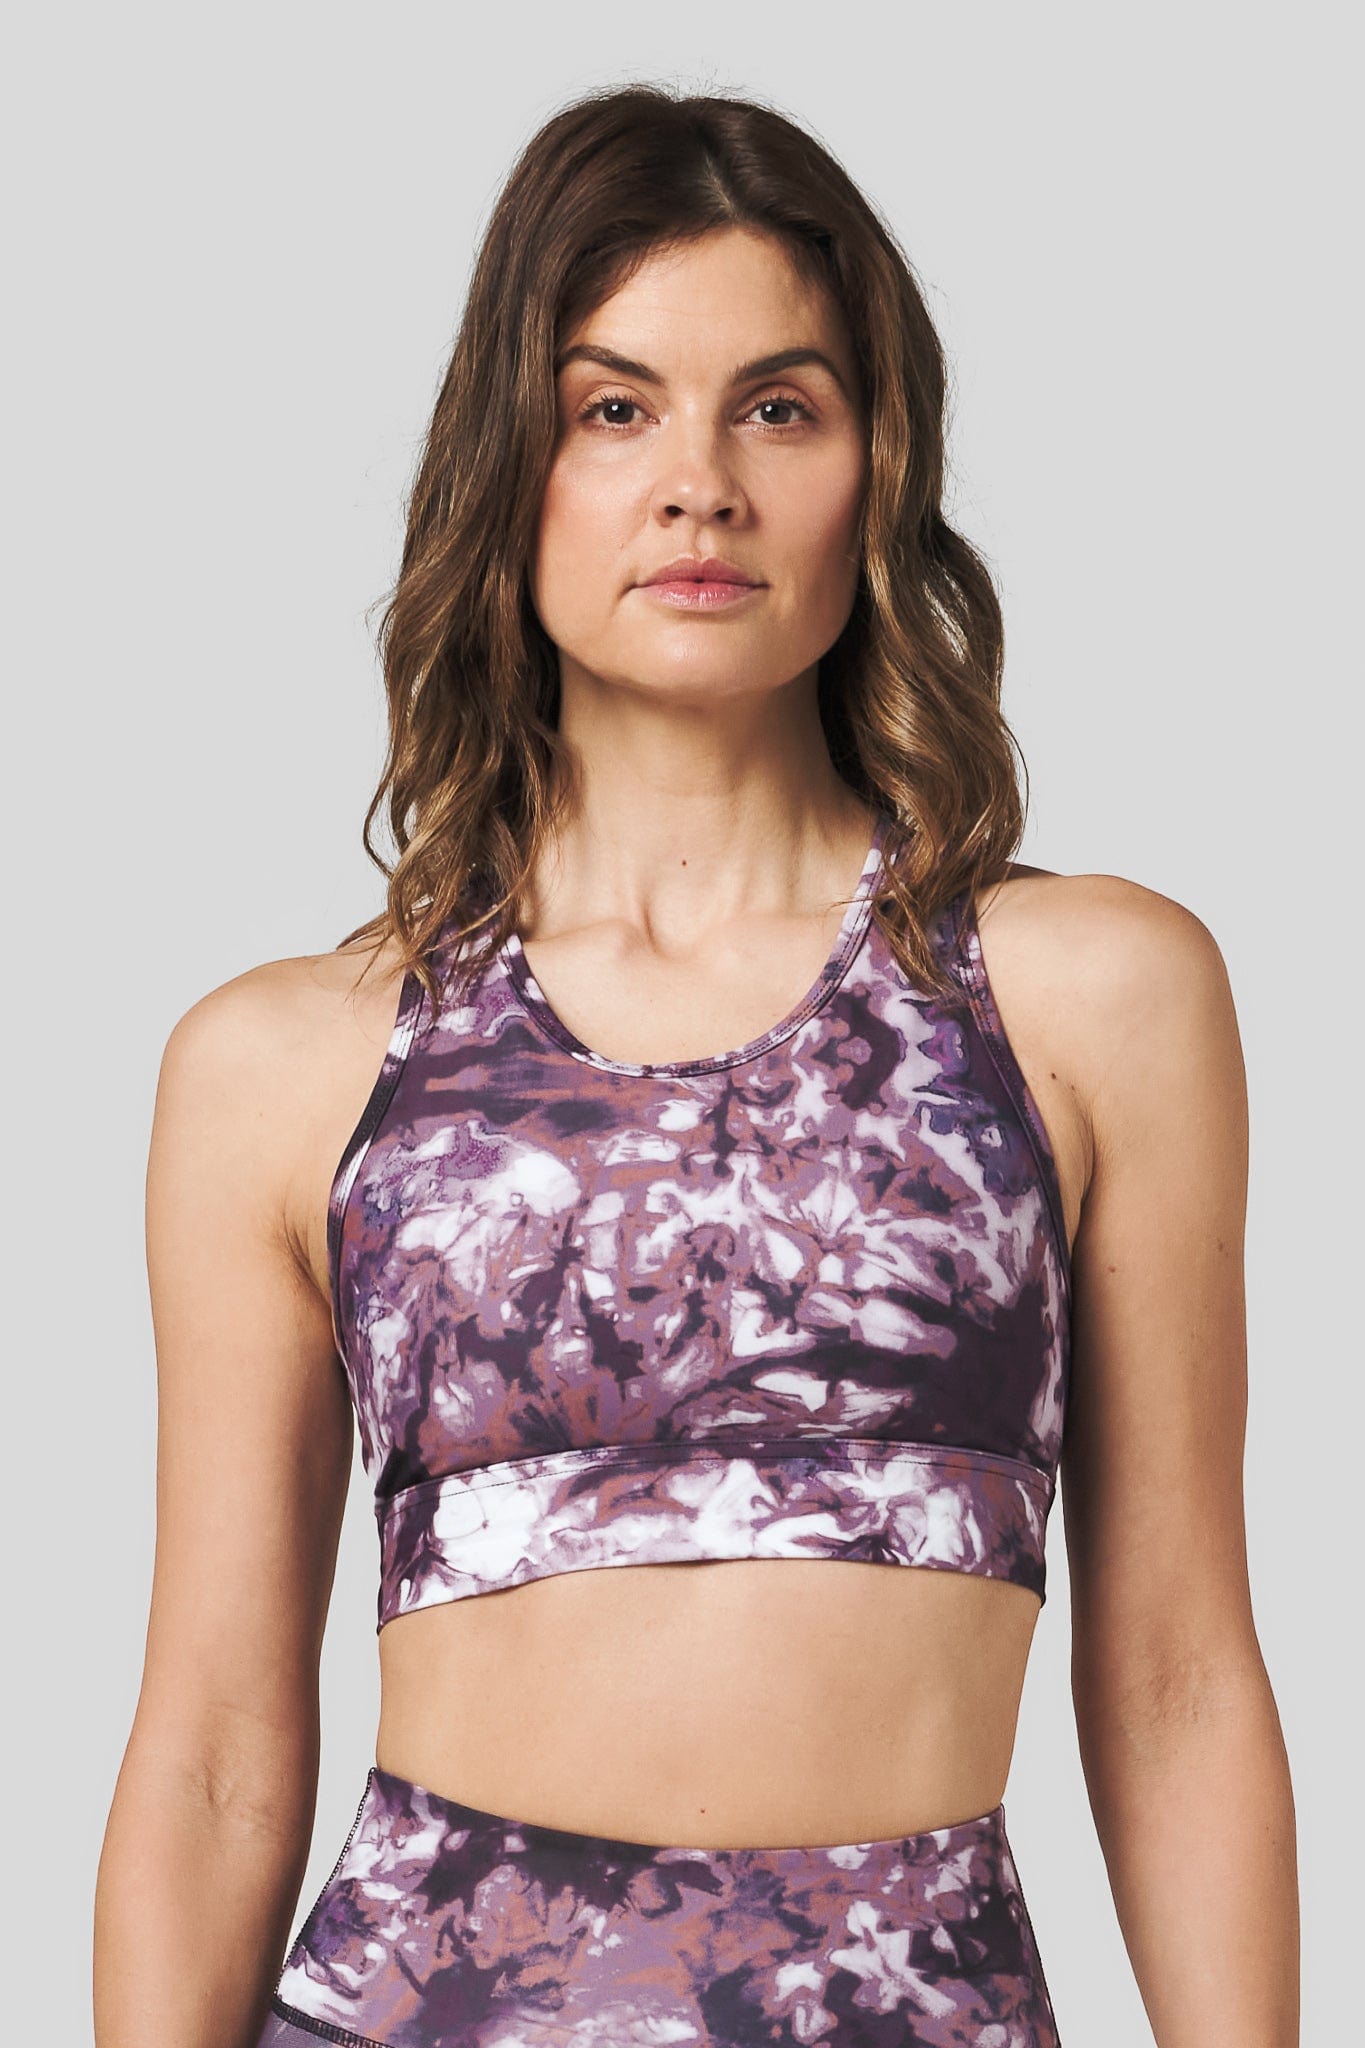 A brunette woman wears a high neck sports bra in a burgundy and white tie-dye print.